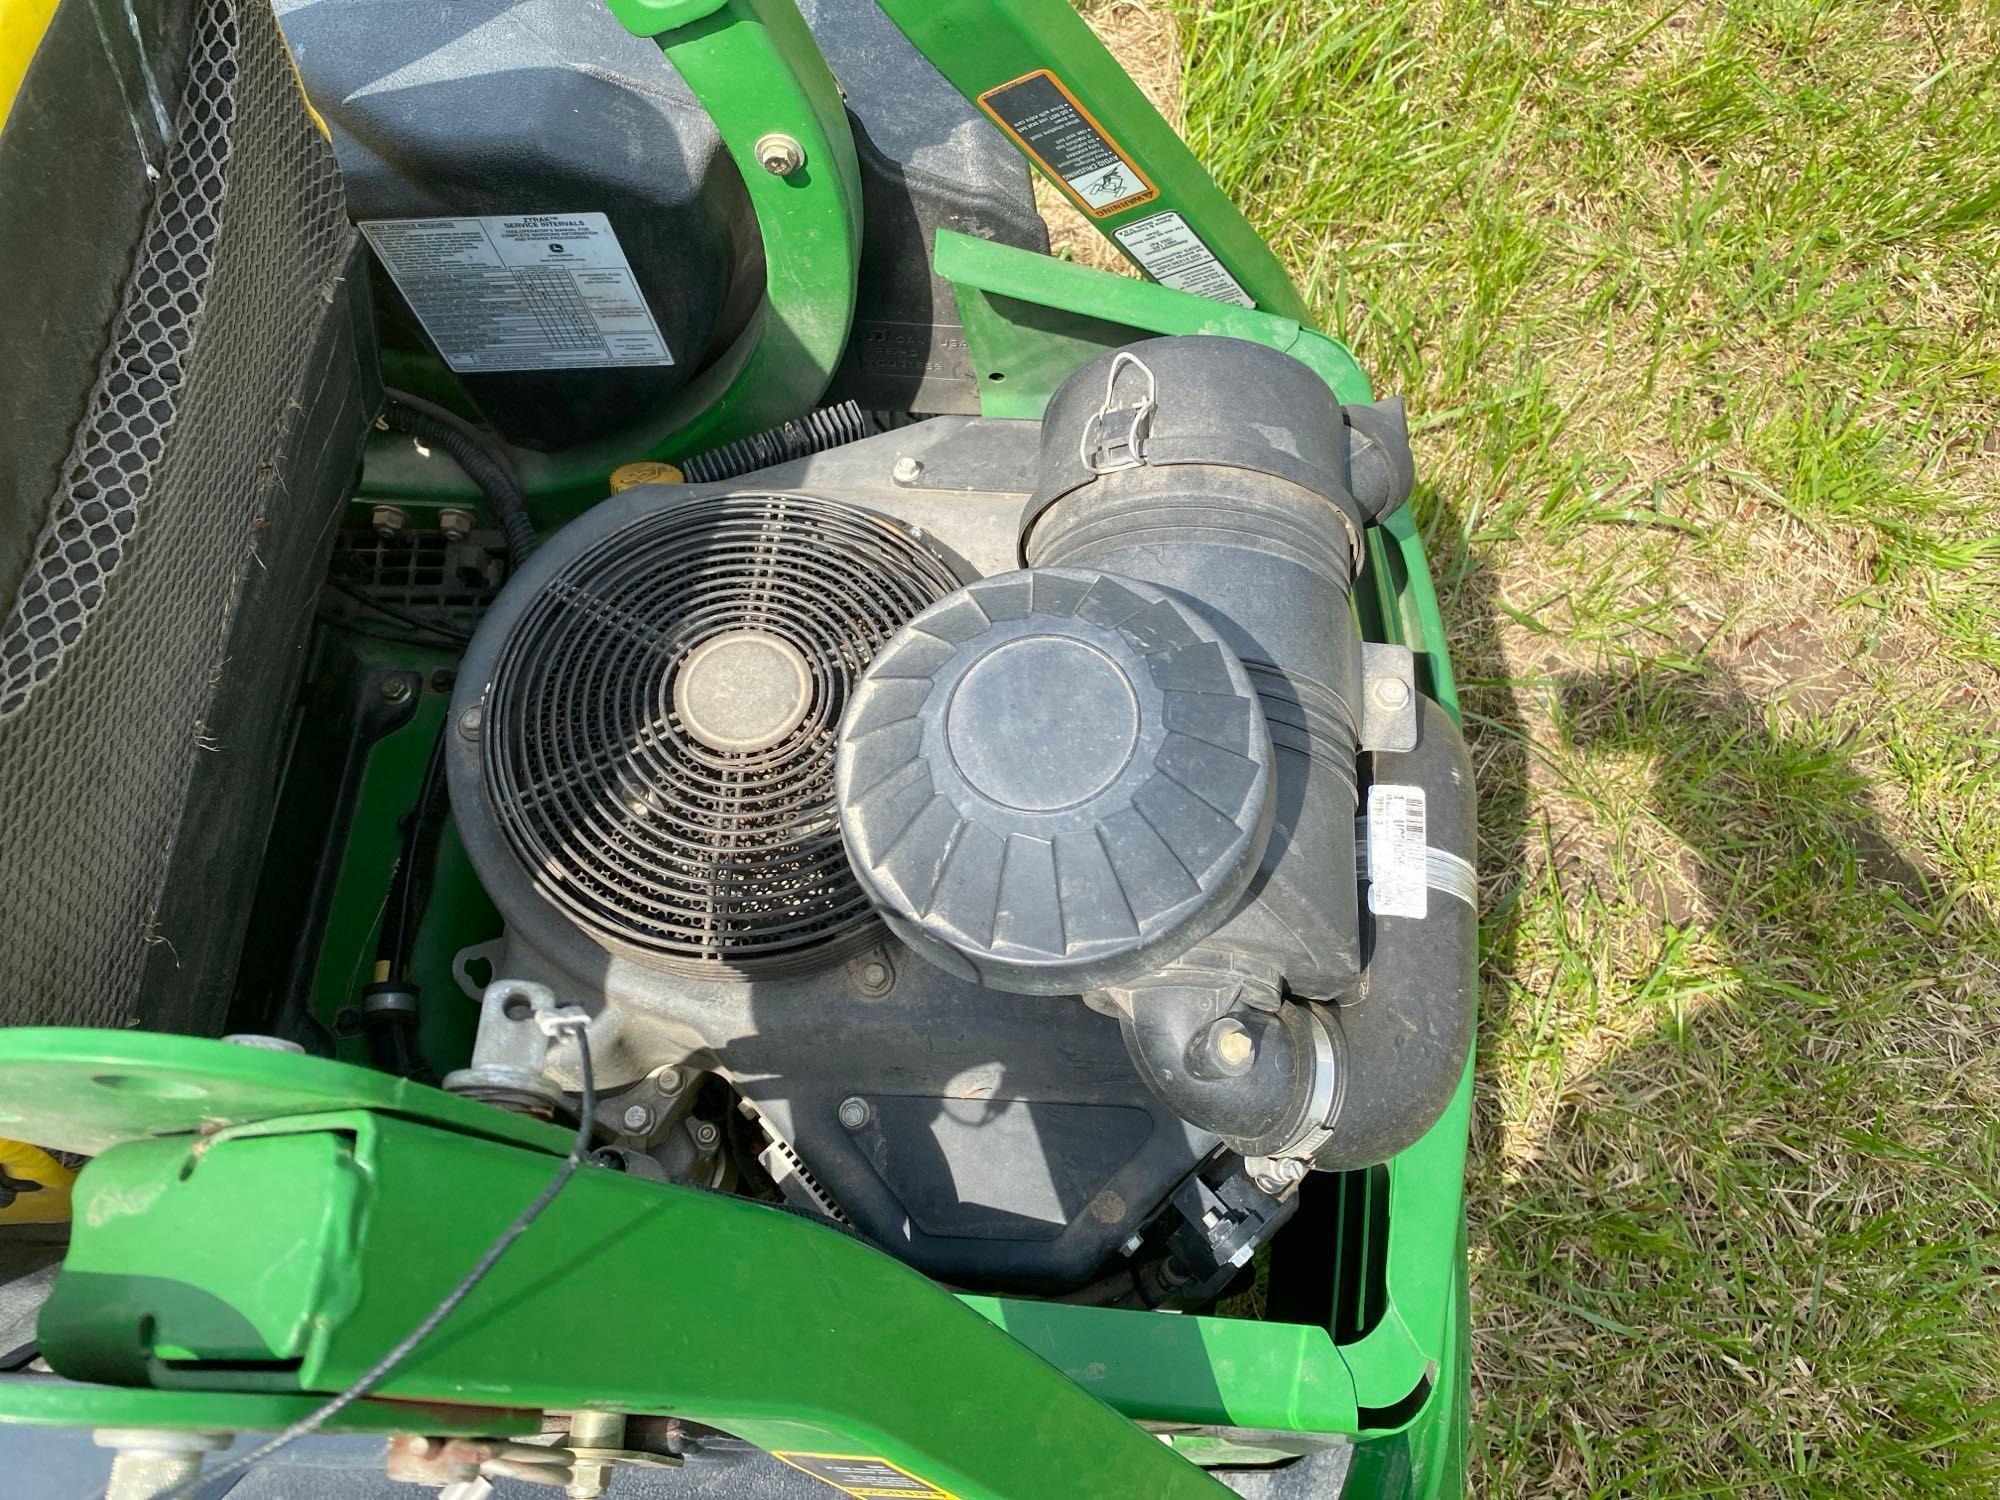 JOHN DEERE Z960R COMMERCIAL MOWER SN-010061 powered by gas engine, equipped with 60in. cutting deck,